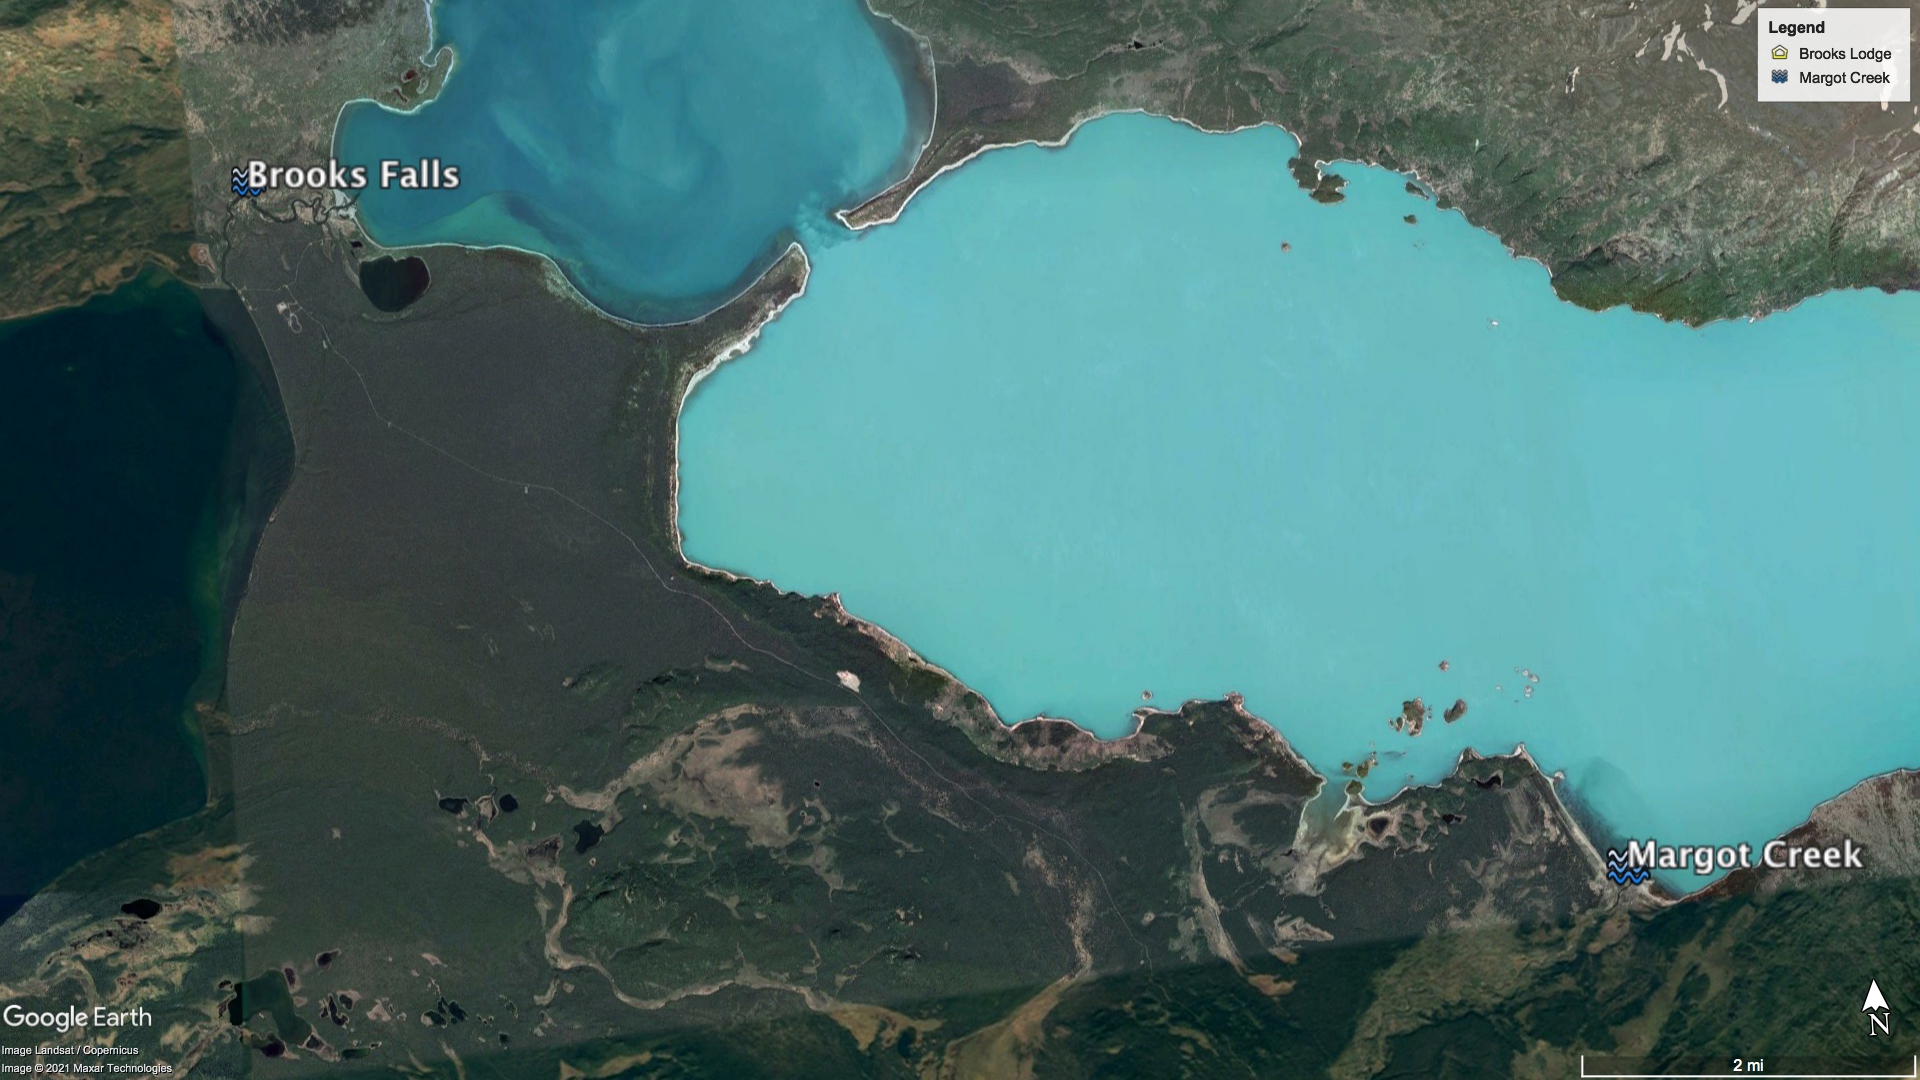 Google Earth image showing relative locations of Brooks Falls (upper left) and Margot Creek (lower right). Thickly vegetated land surrounds milky blue lake. North is the top of the map. The scale at lower right is 2 miles